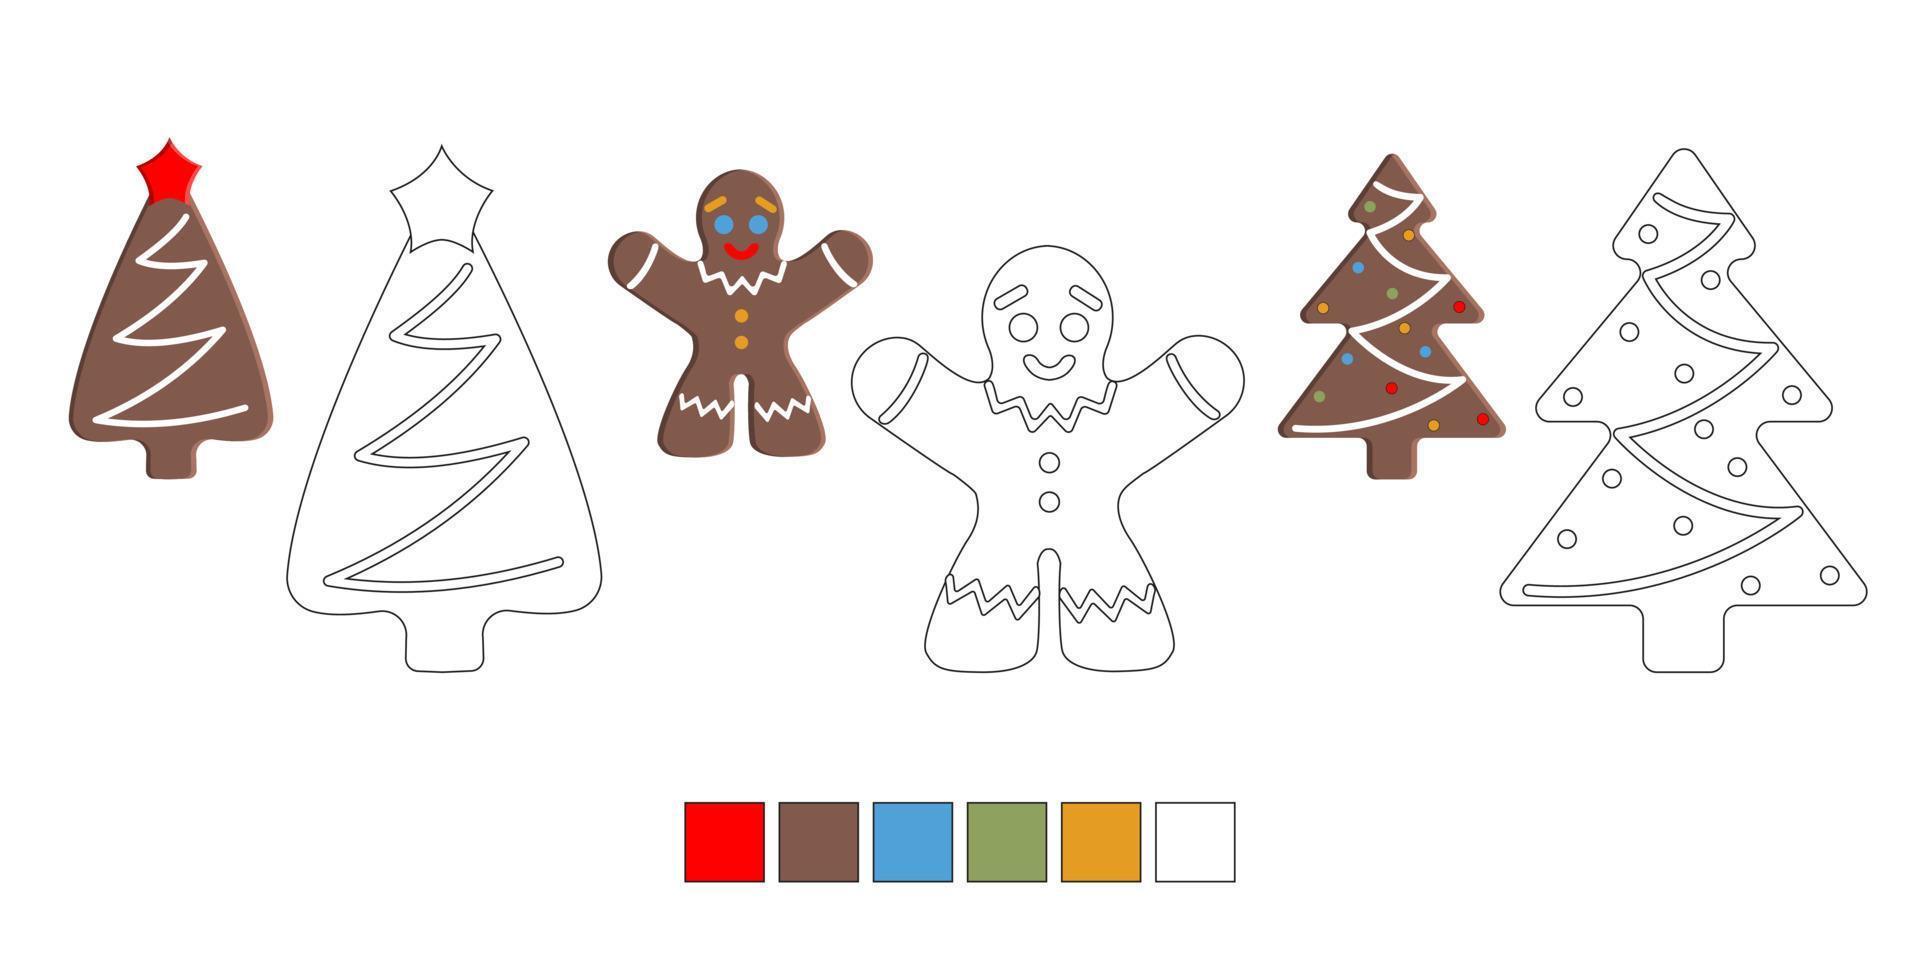 Christmas coloring book for children. Gingerbread figures, Christmas trees and a man. Vector illustration.